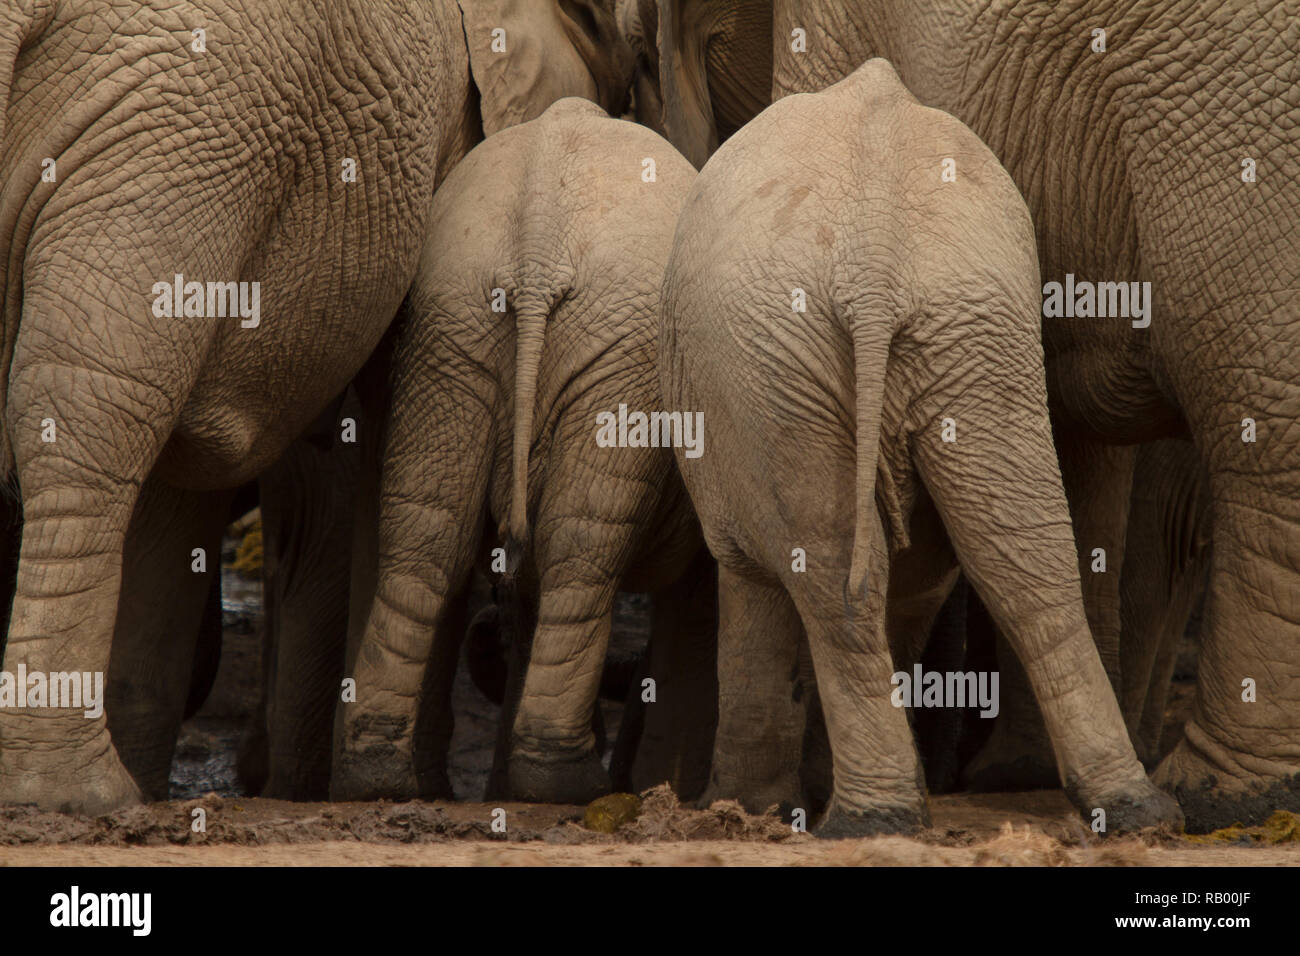 Two young elephants squeeze in between a herd of adult elephants, Addo Elephant National Park, South Africa Stock Photo